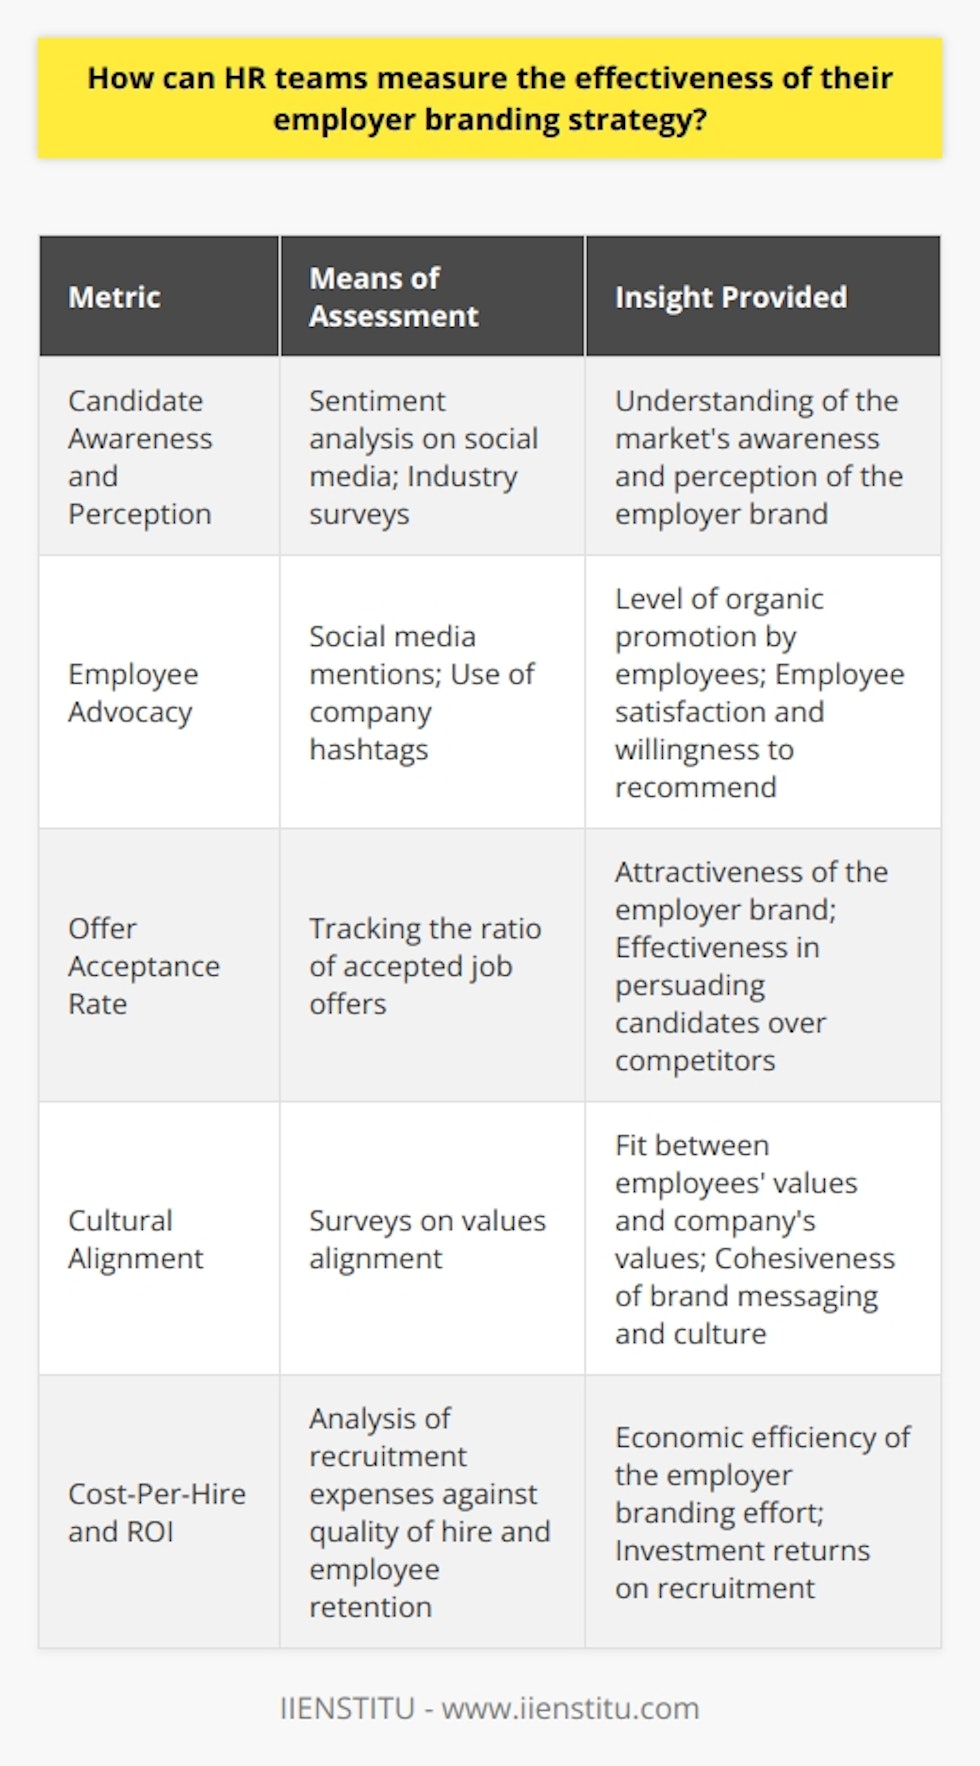 Assessing the impact of an employer branding strategy is critical for HR teams to ensure they are effectively attracting and retaining top talent. Here is a structured approach to evaluating the effectiveness of such strategies, focusing on unique, actionable metrics beyond common knowledge.Candidate Awareness and Perception AnalysisUnderstanding how aware potential candidates are of a company's employer brand and their perceptions can be a valuable metric. HR can deploy sentiment analysis on social media and professional networks to monitor what is being said about the company as an employer. Surveys targeting external professionals in the industry can also provide insights into brand perception and awareness outside the company.Employee AdvocacyEmployee advocacy metrics reveal how often current employees share positive experiences about their workplace. By tracking social media mentions and the use of company-specific hashtags, HR can quantify the level of organic advocacy. An increase in positive mentions could indicate that employees are satisfied and willing to act as brand ambassadors.Offer Acceptance RateThe rate of accepted job offers gives HR teams direct insight into the attractiveness of the employer brand. If the acceptance rate is high, it suggests that the brand is strong enough to persuade candidates to choose the company over competitors. By examining patterns and changes in acceptance rates over time, HR can identify whether employer branding strategies are improving their effectiveness.Cultural AlignmentMeasuring how well employees’ personal values align with corporate values can be an indicator of a successful employer branding strategy. Through surveys that assess the degree of value alignment, HR teams can get a sense of whether their branding messages are translating into a cohesive company culture.Cost-Per-Hire and ROICost-per-hire, when combined with the quality of hire, can suggest how employer branding efforts are affecting recruitment costs. A more potent brand may reduce the need for spending on sourcing candidates, as a passive pool of interested talent is being formed. By comparing the costs of hiring and integrating of new employees to their performance and retention, HR teams can assess the return on investment (ROI) of their employer branding efforts.Collecting these metrics requires a consistent approach to data gathering, analysis, and reflection. HR teams can establish a standardized set of tools and methods for assessing these KPIs periodically. One effective way for HR professionals to learn more about advanced methods in employer branding assessment is through specialized training and certification programs such as those offered by IIENSTITU, a provider of professional development in fields like HR and employer branding.By leveraging these nuanced KPIs, HR teams are better equipped to refine their strategies and build a compelling and authentic employer brand that resonates with both current and prospective employees.